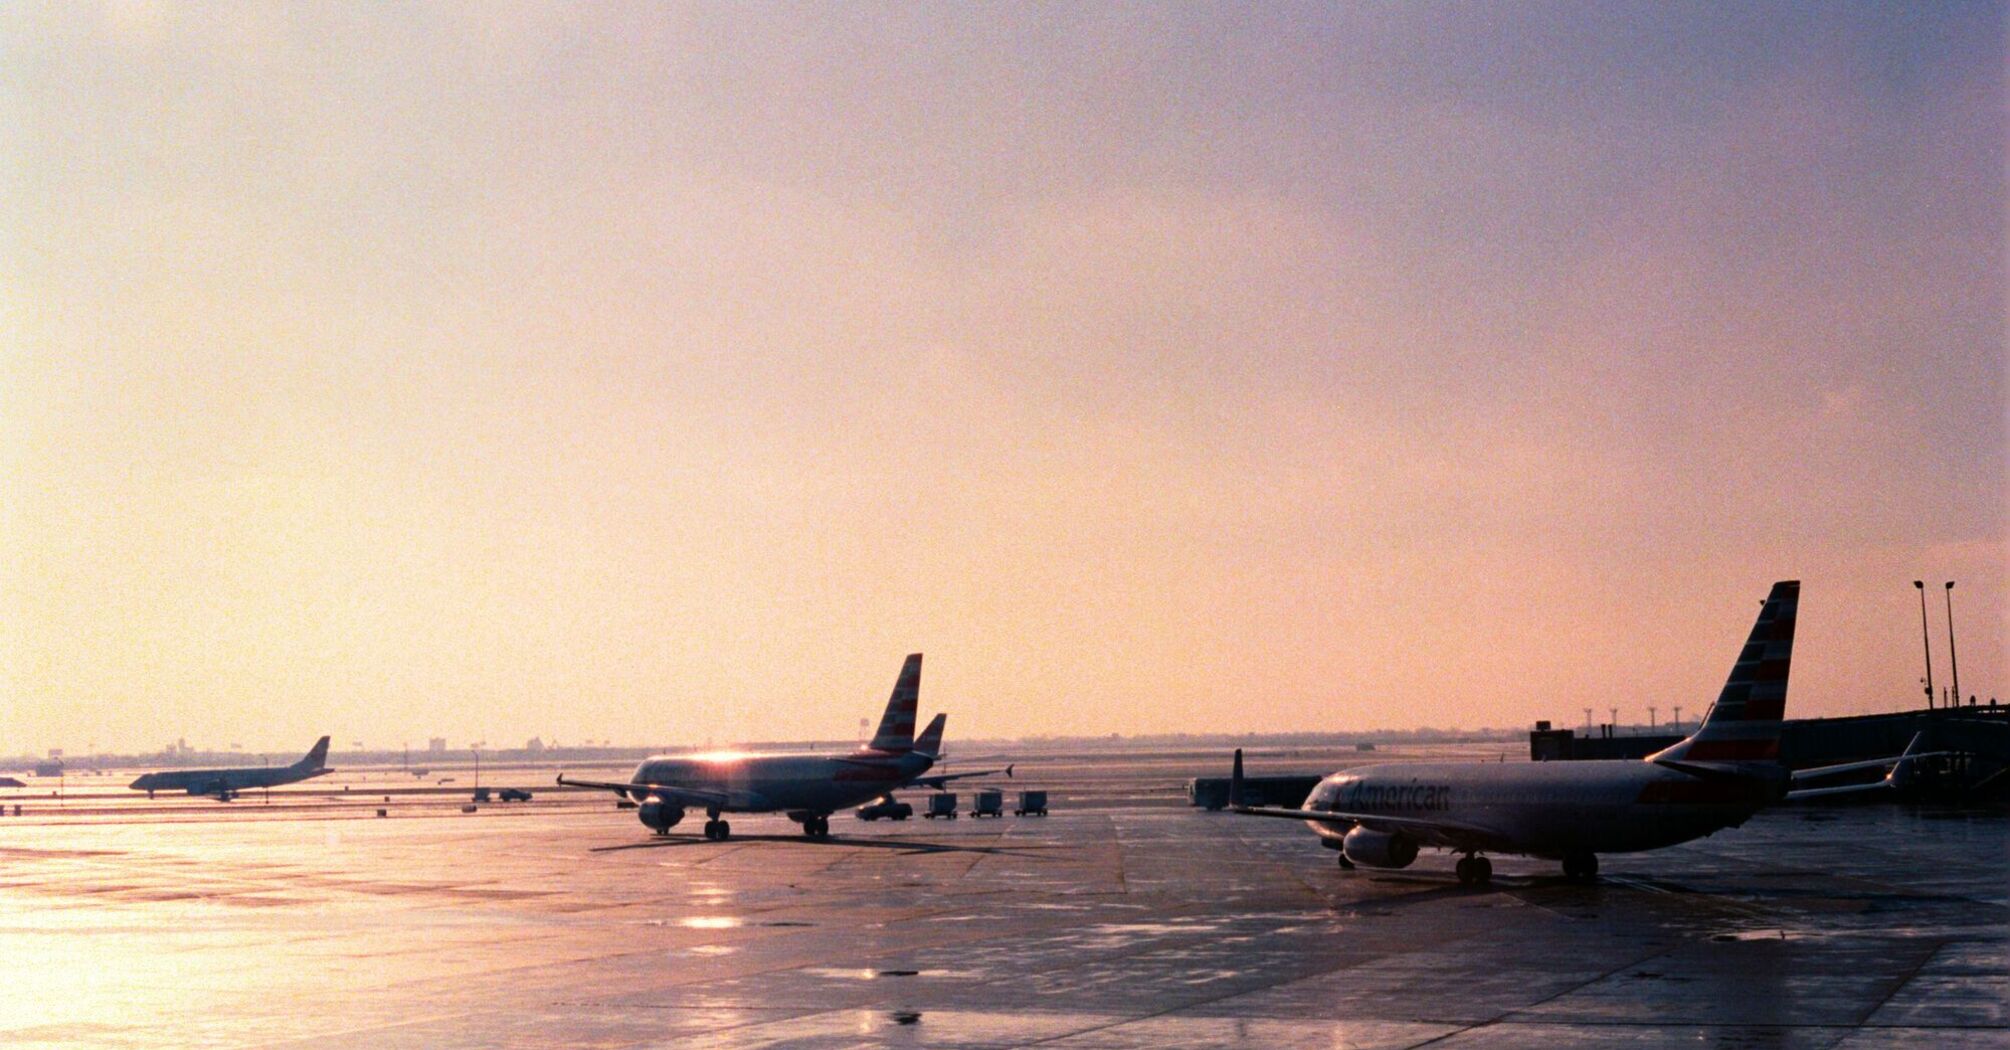 Planes at airport during daytime